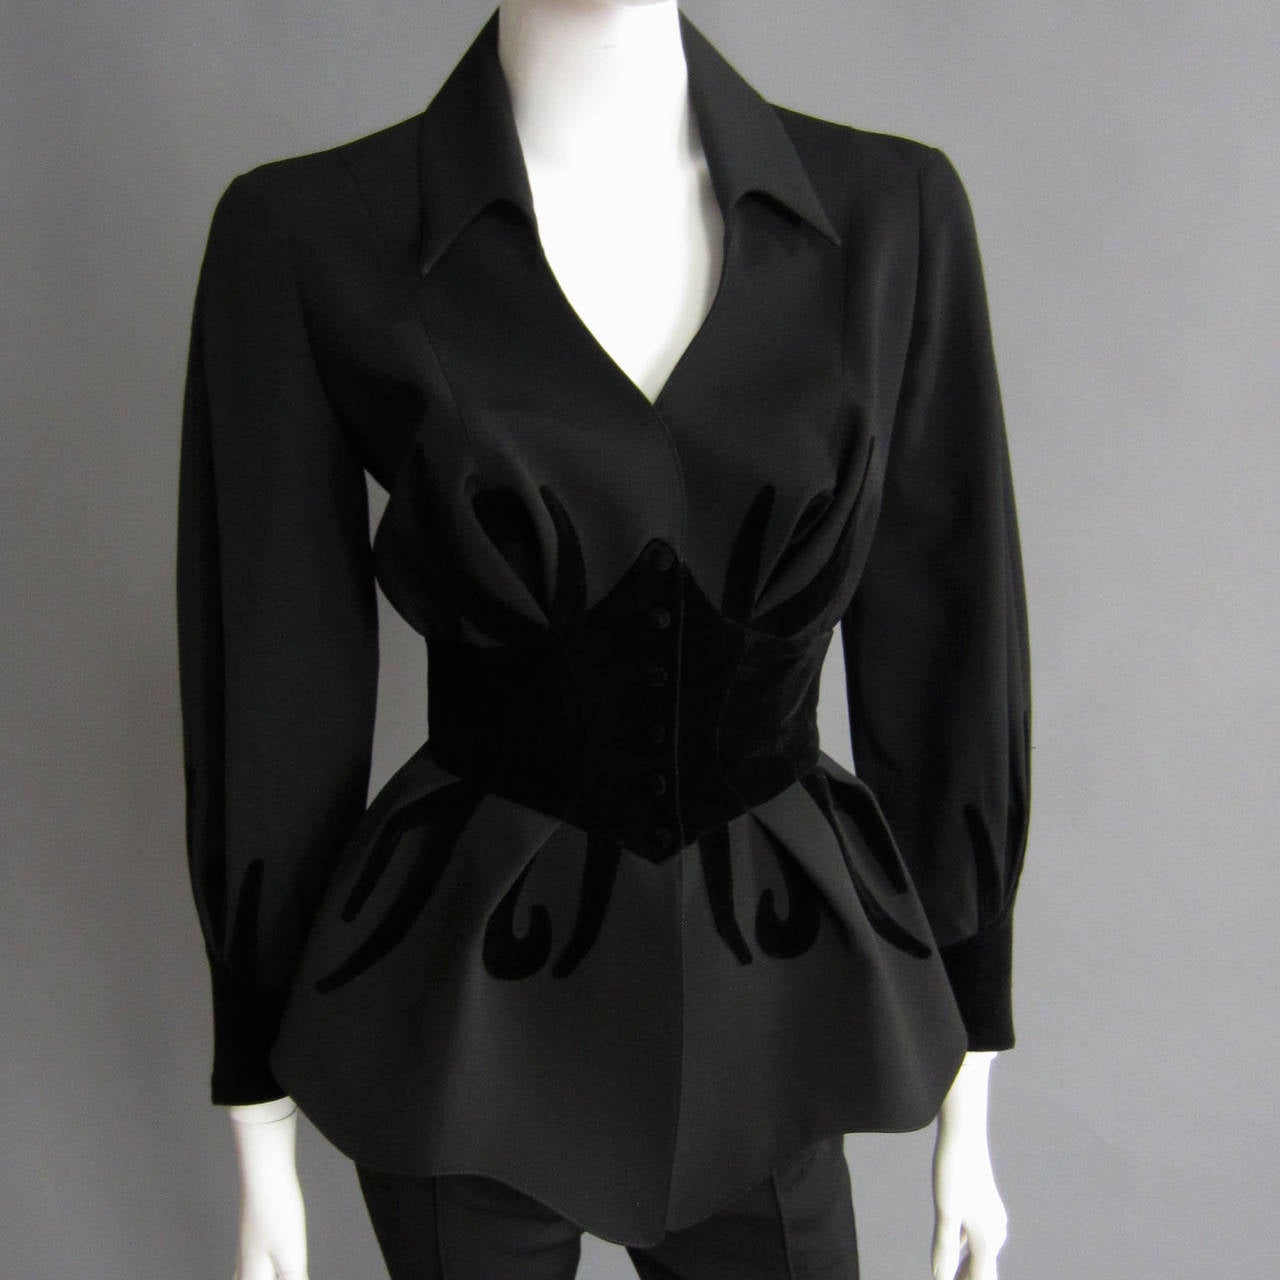 A fabulous piece of art by the master himself, THIERRY MUGLER. This black suit features a dramatic, fitted jacket and a pair of fitted, flared pants. The jacket features a velvet, corset style waistband with seam detailing. Along the front and back,